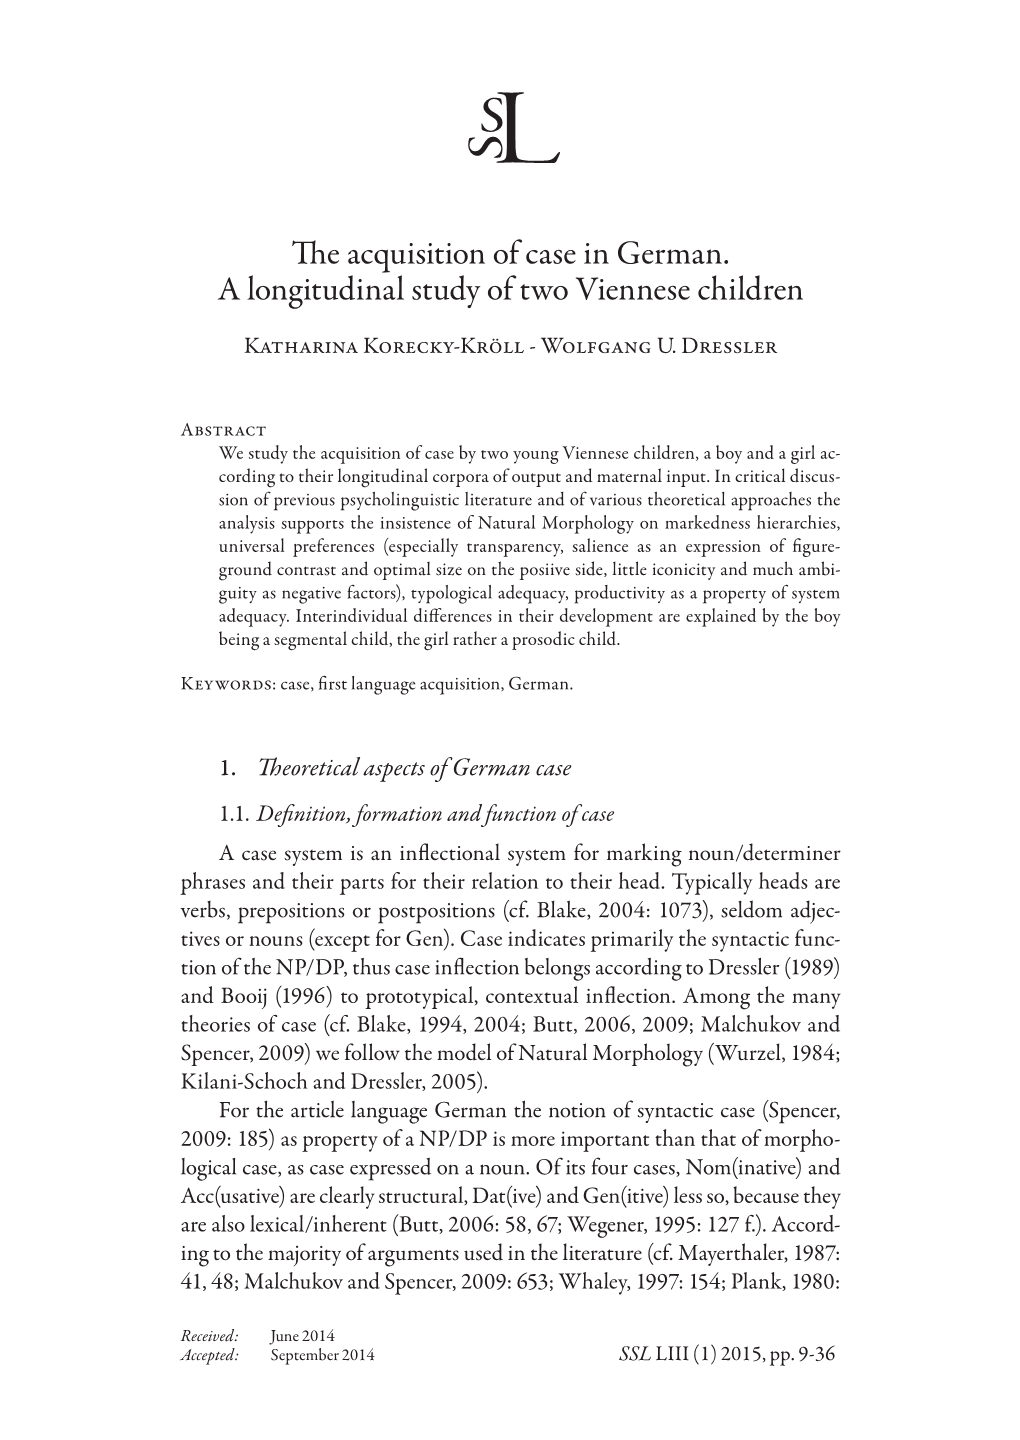 The Acquisition of Case in German. a Longitudinal Study of Two Viennese Children